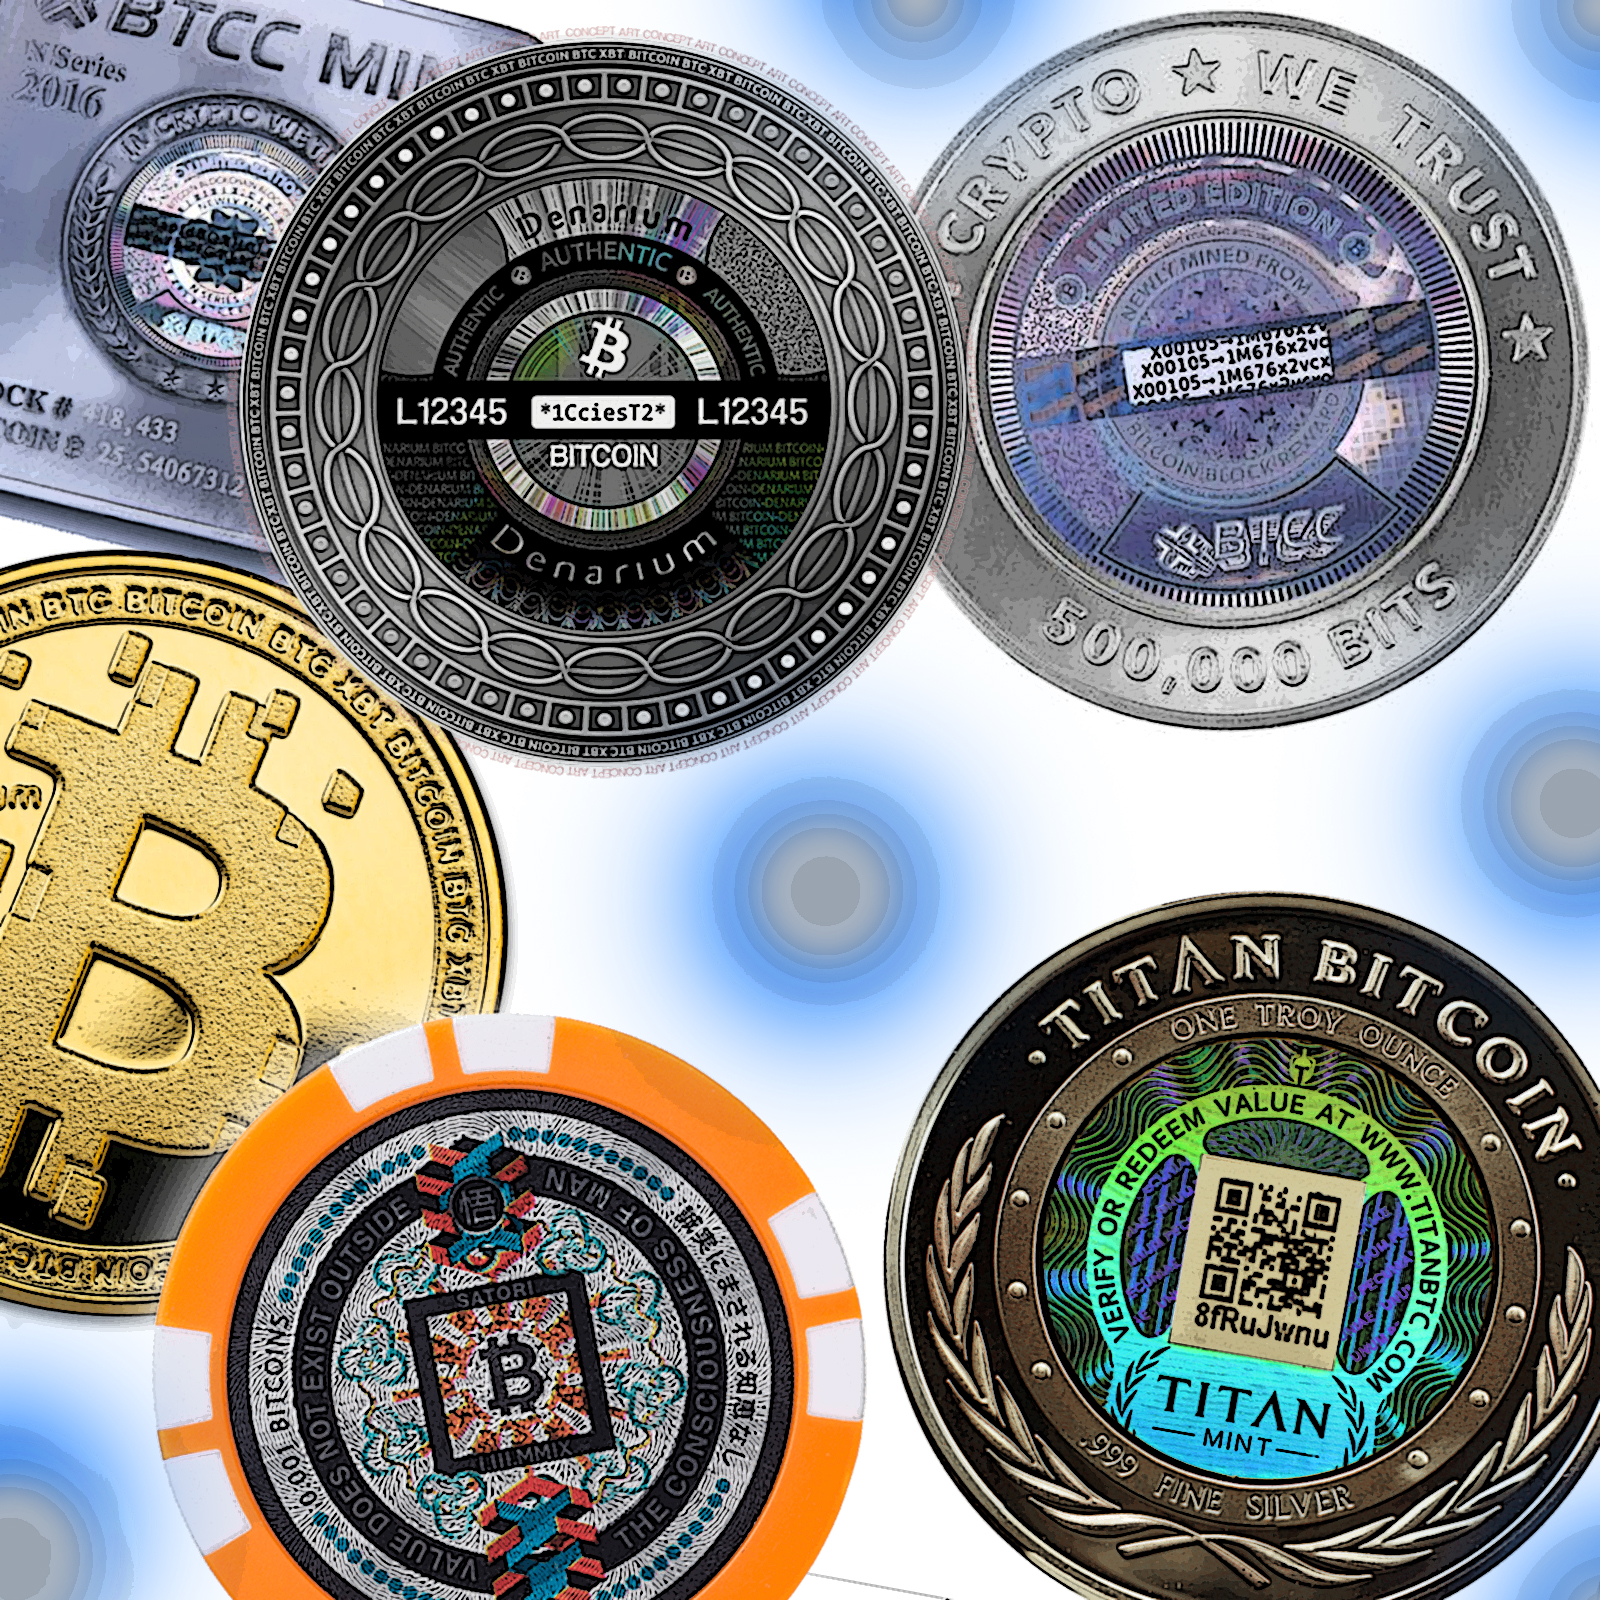 9Pcs Bitcoin BTC Cryptocurrency Chase Coin Gold Silver and Bronze Physical Bitcoin Coin Blockchain Cryptocurrency in Protective Collectable Gift Featuring Original Commemorative Tokens 